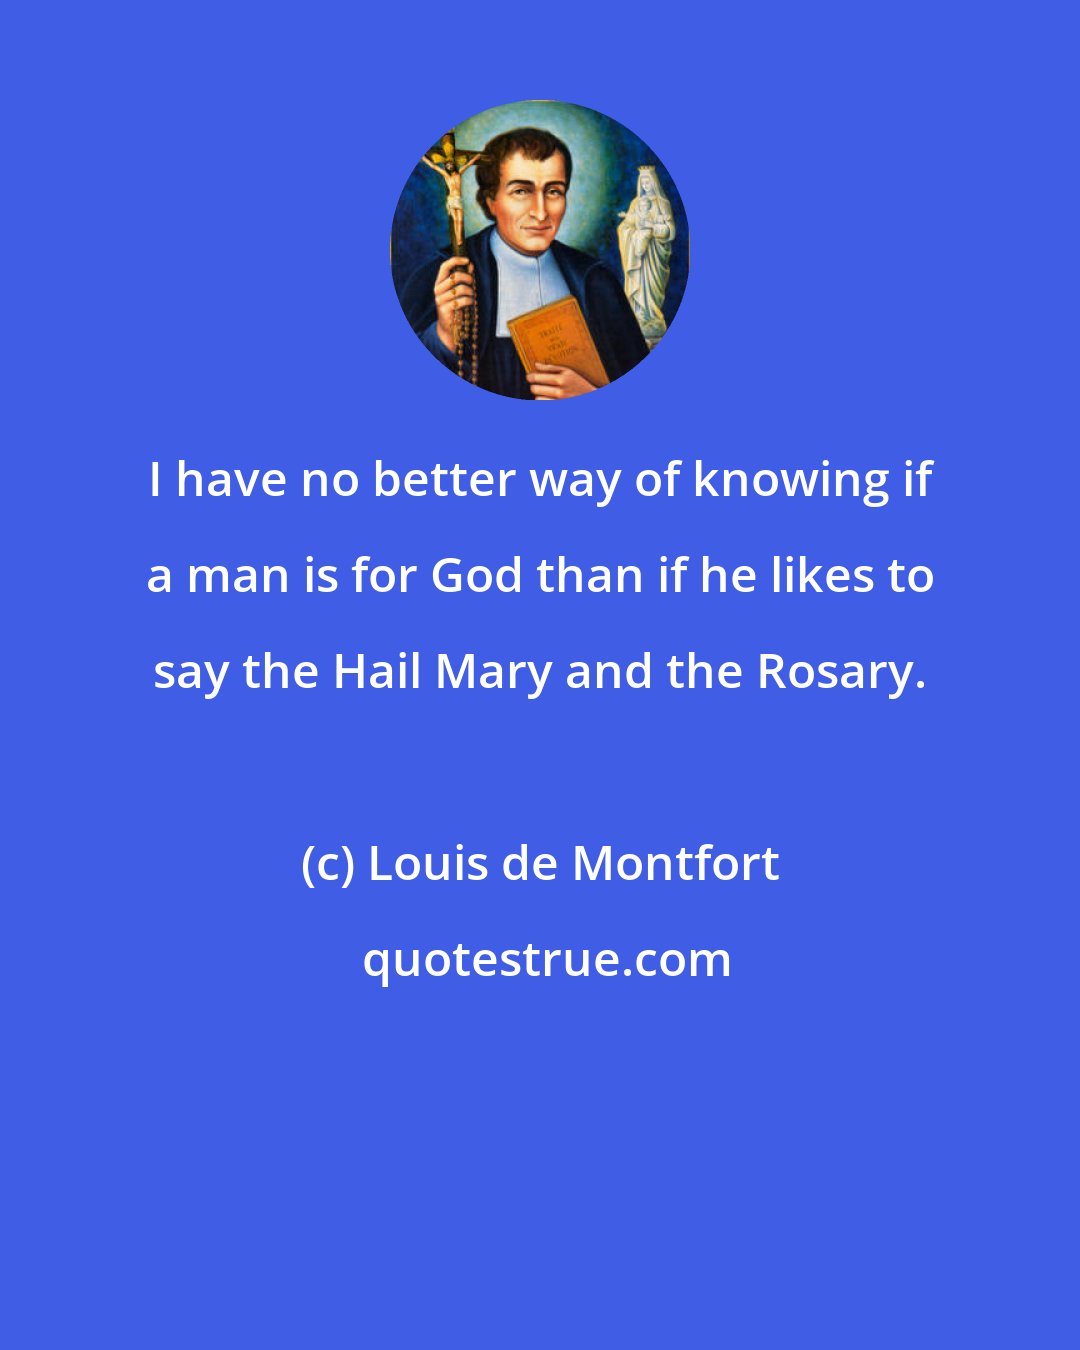 Louis de Montfort: I have no better way of knowing if a man is for God than if he likes to say the Hail Mary and the Rosary.